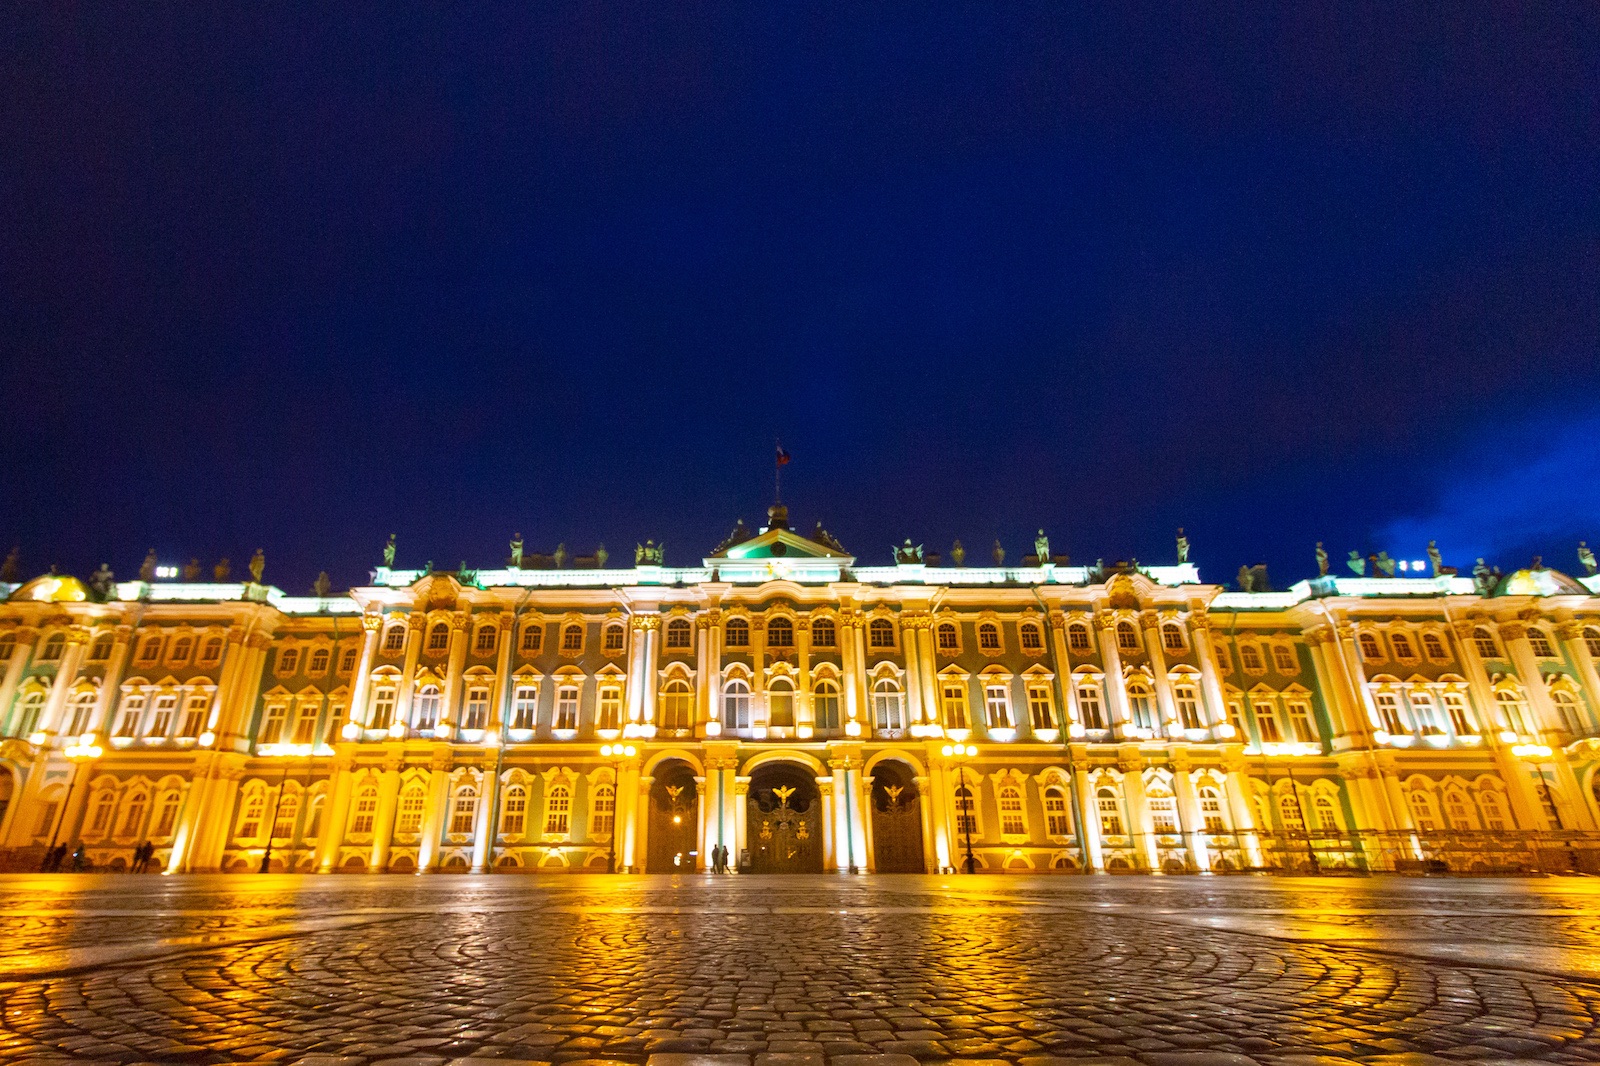 A night shot of the facade of St. Petersburg's Winter Palace. Somewhat Russian, somewhat European in architecture.